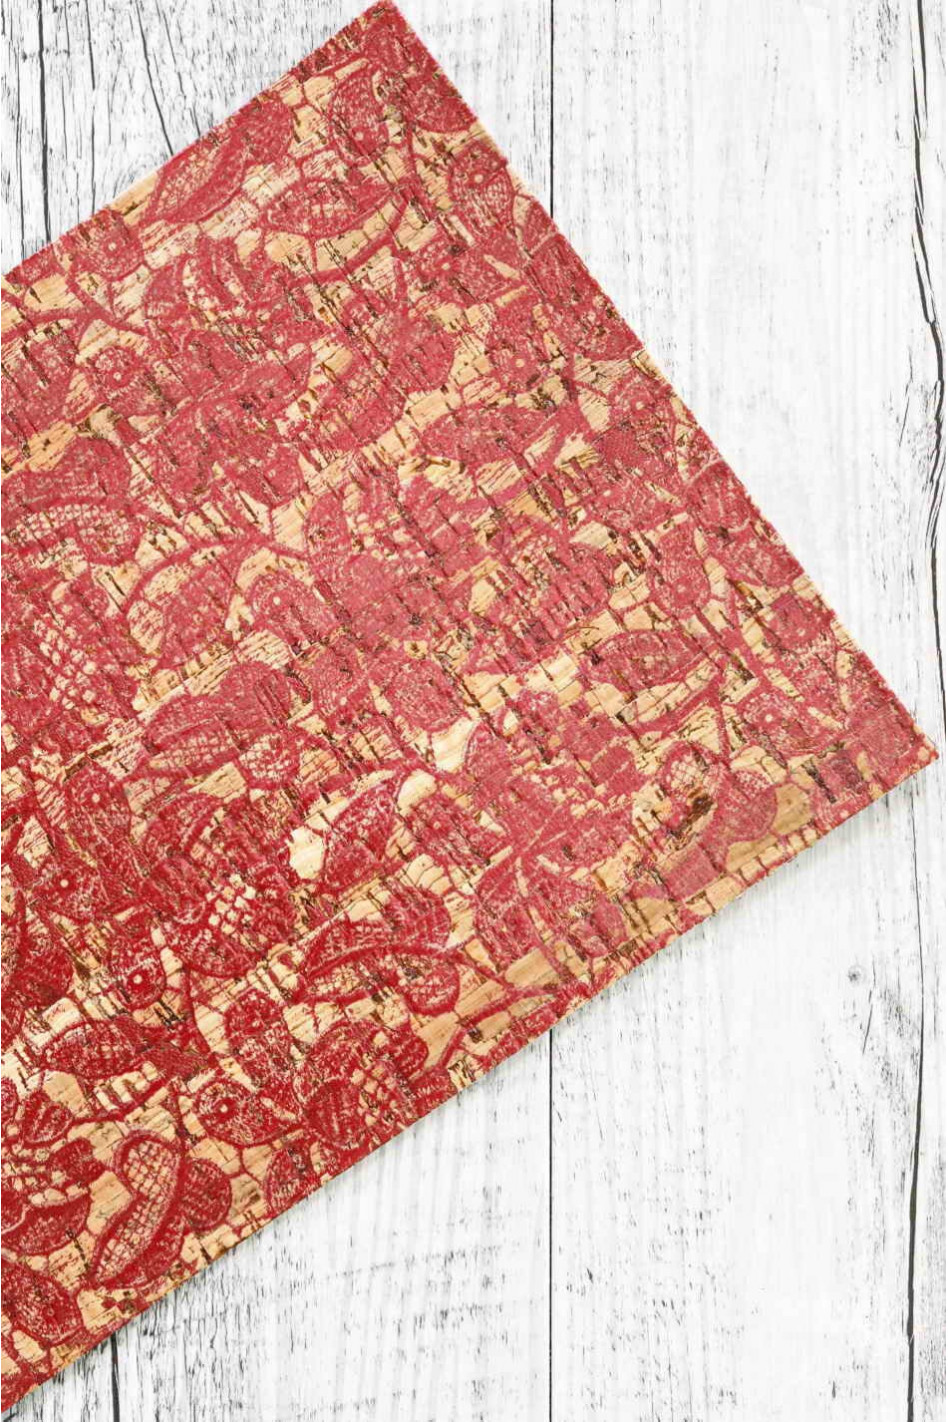 CORK sheets, made in Italy, dark pink floral textured, print flowers